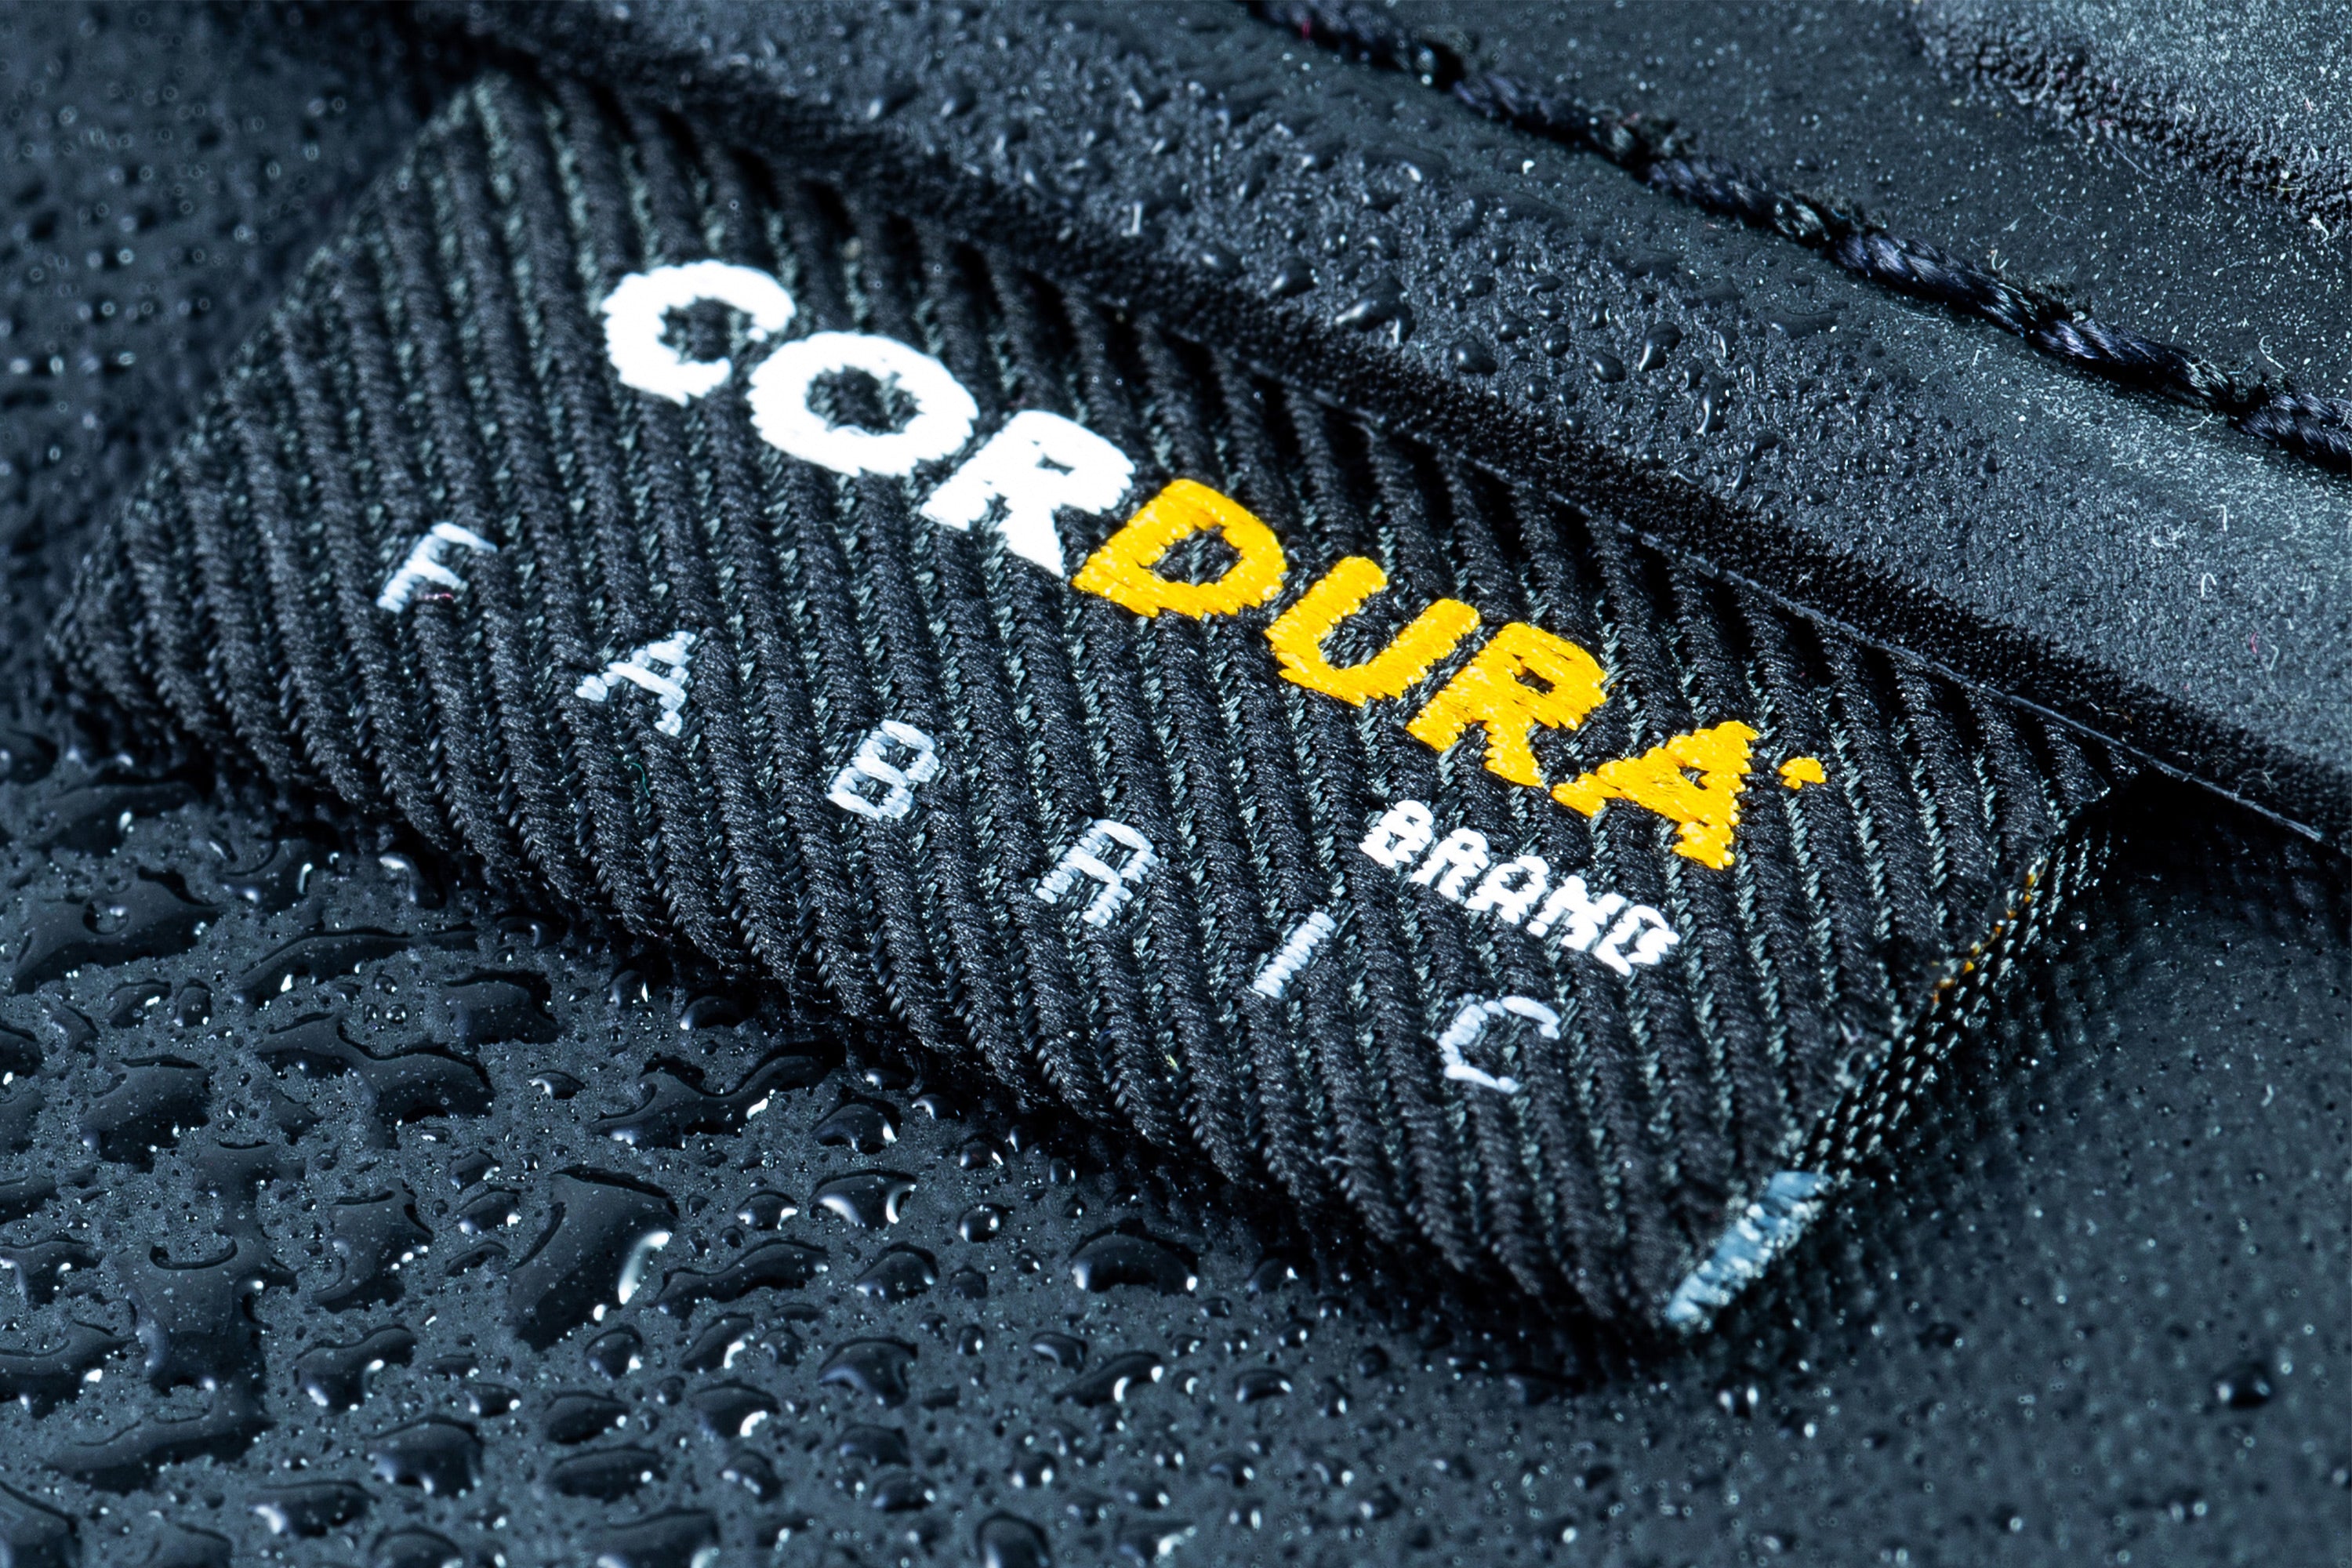 What Is CORDURA Fabric & Why Is It So Durable? – Olivers